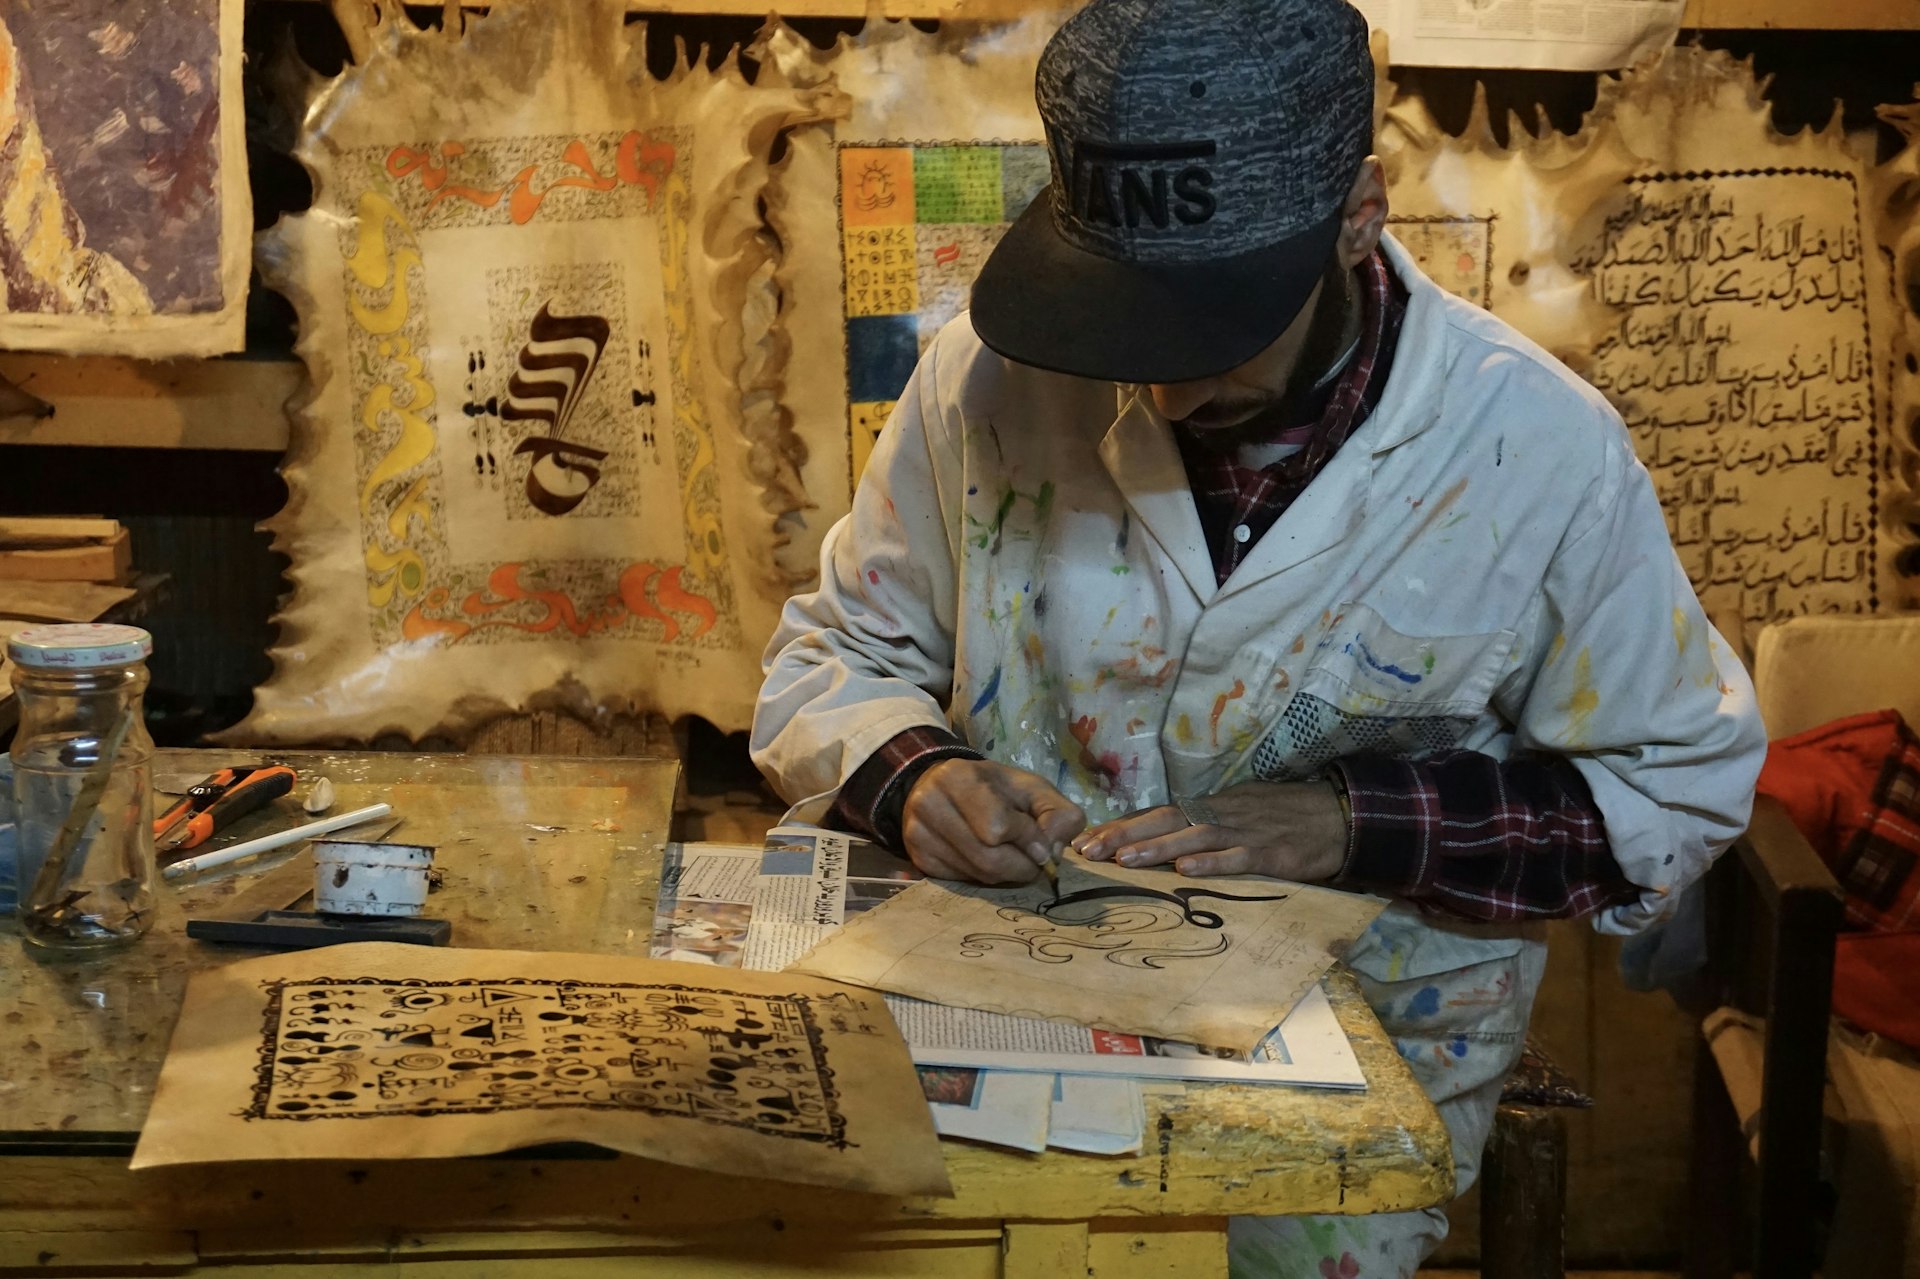 A local artist painting traditional Berber symbols onto canvas in his workshop; many of his works crowd the table he is working on and hang from the wall behind him.